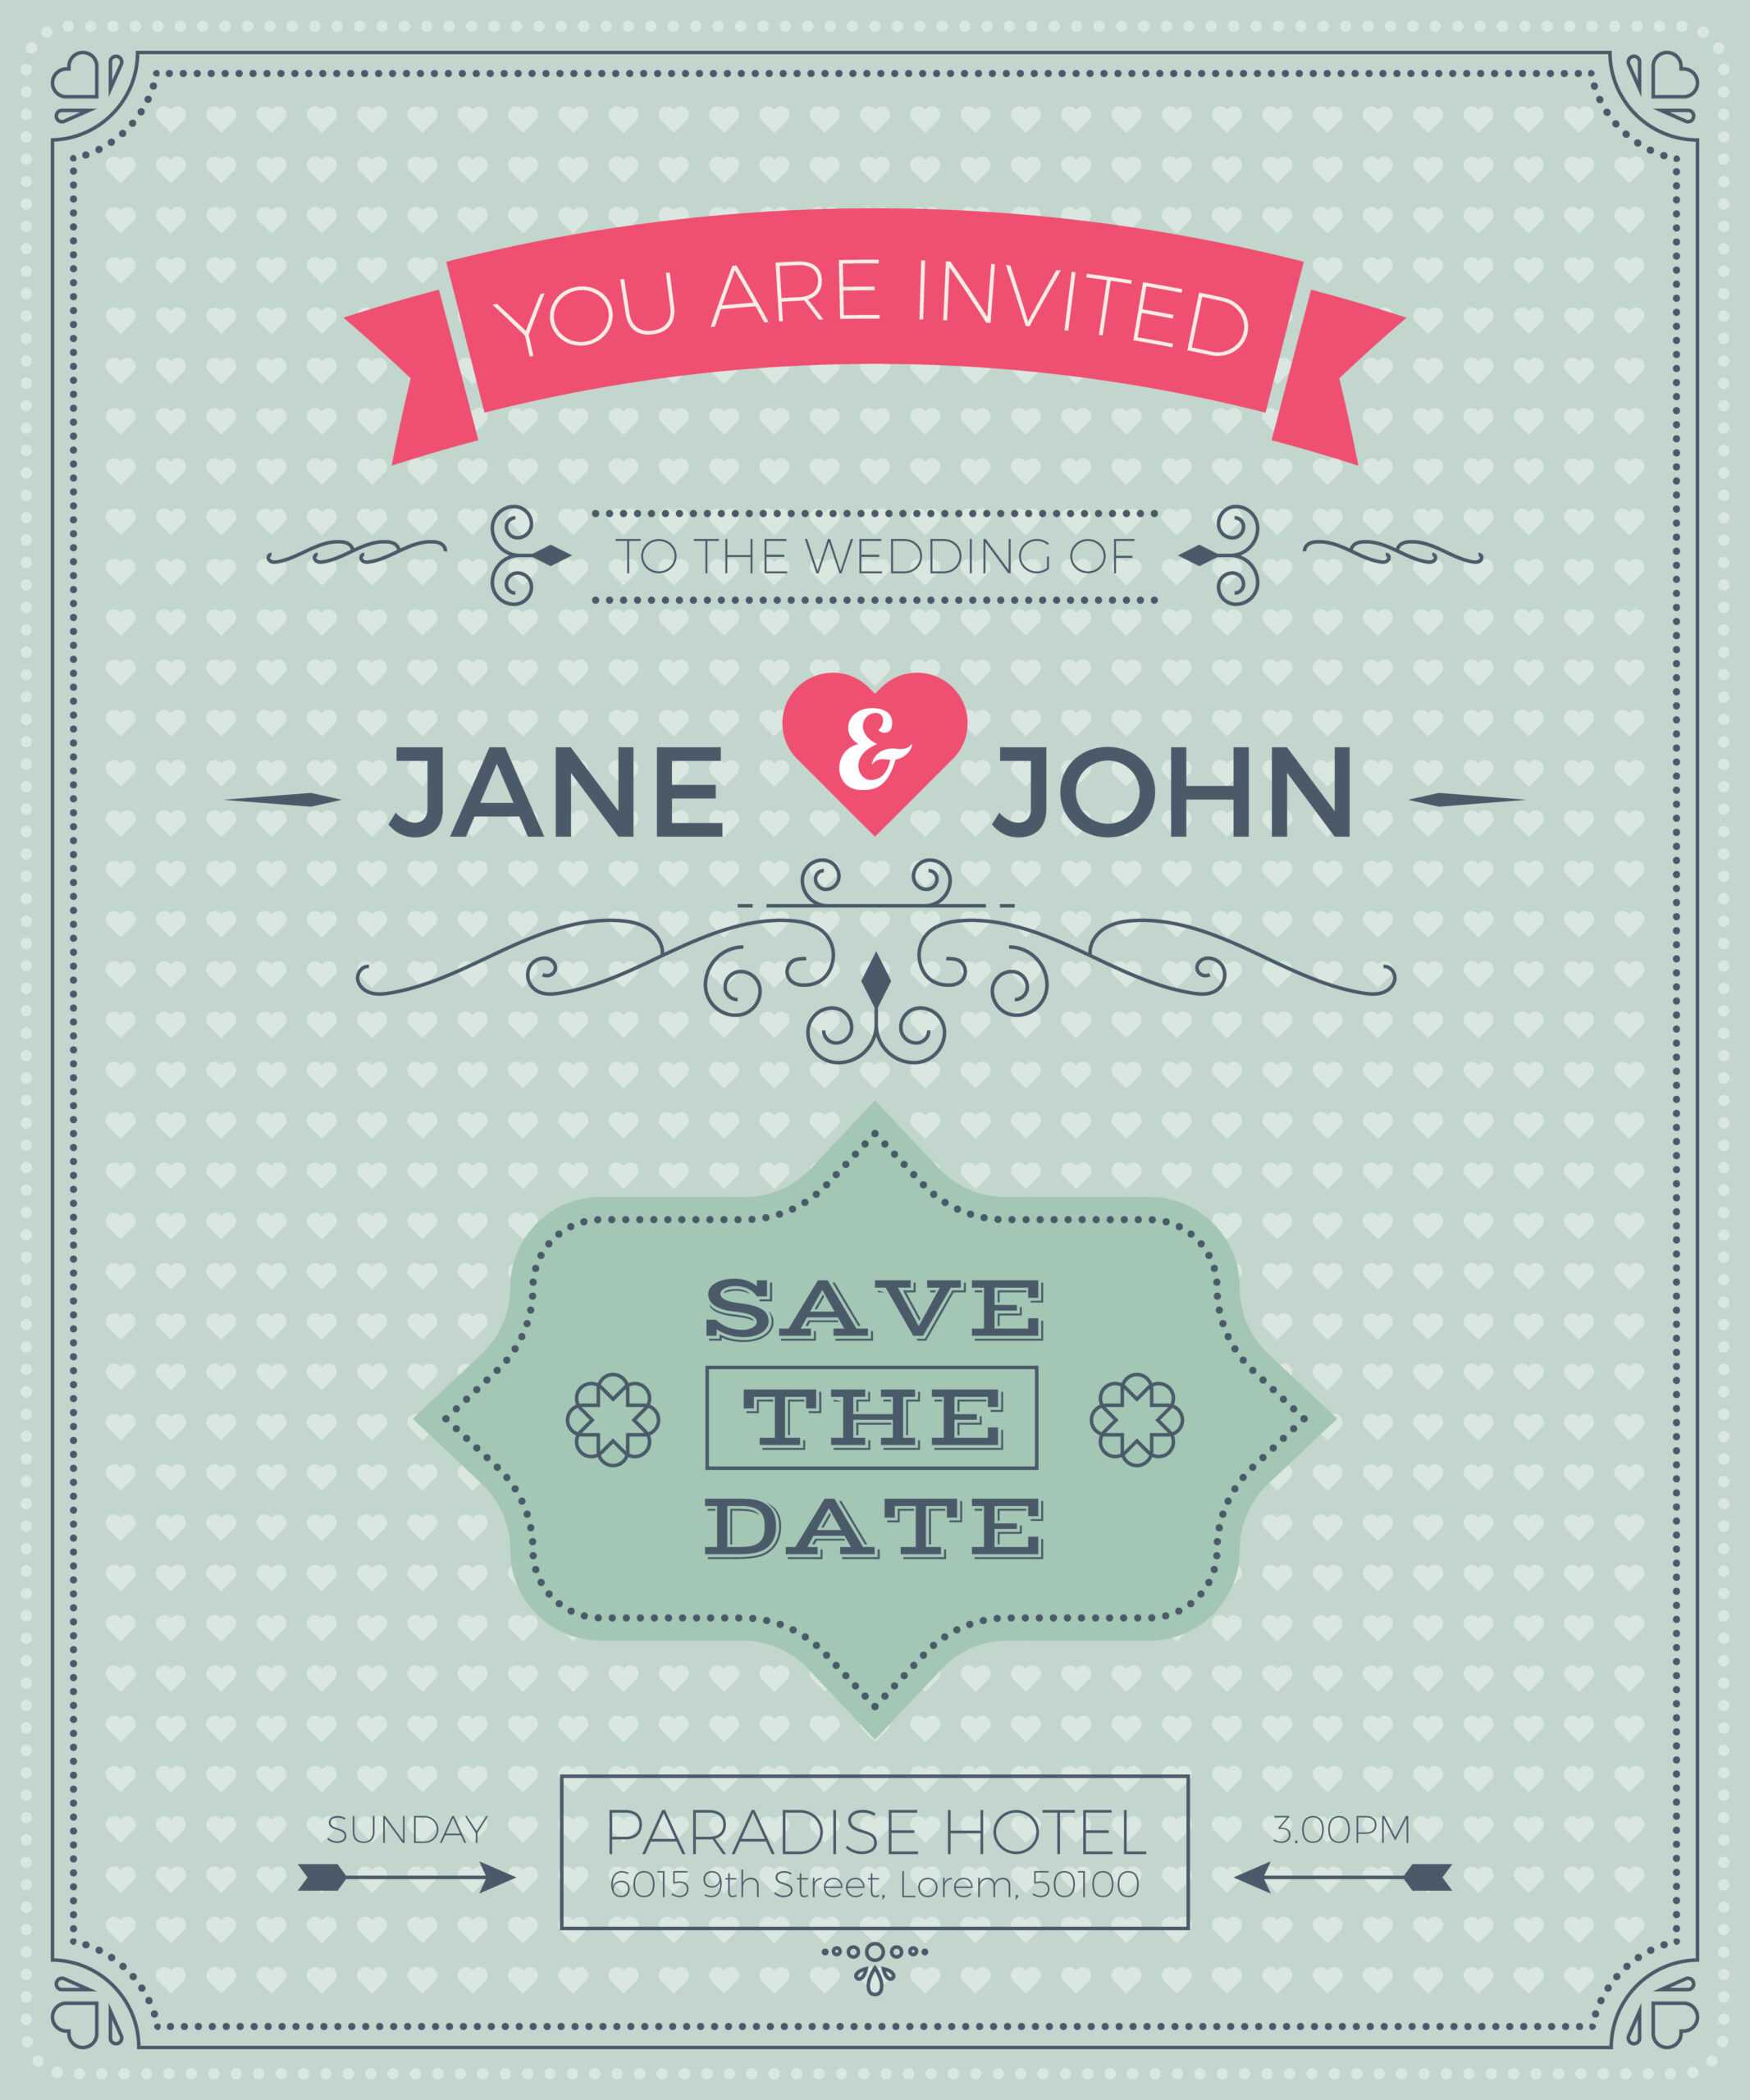 Vintage Wedding Invitation Card Template – Download Free Pertaining To Ss Card Template